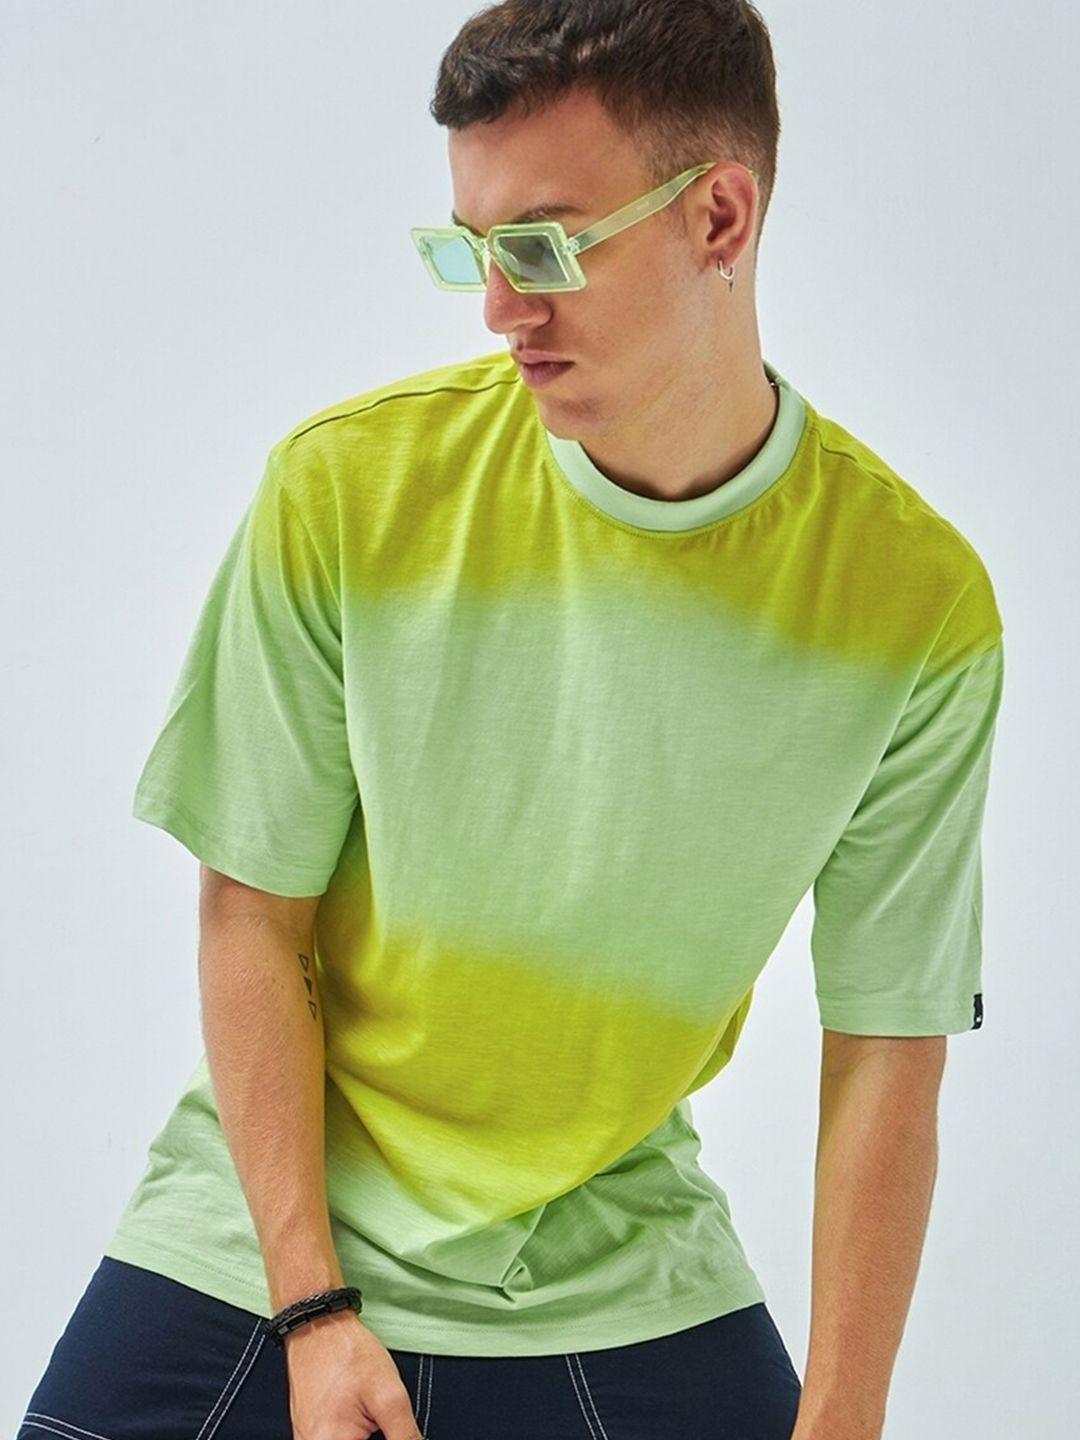 bewakoof green and yellow ombre oversized pure cotton t-shirt